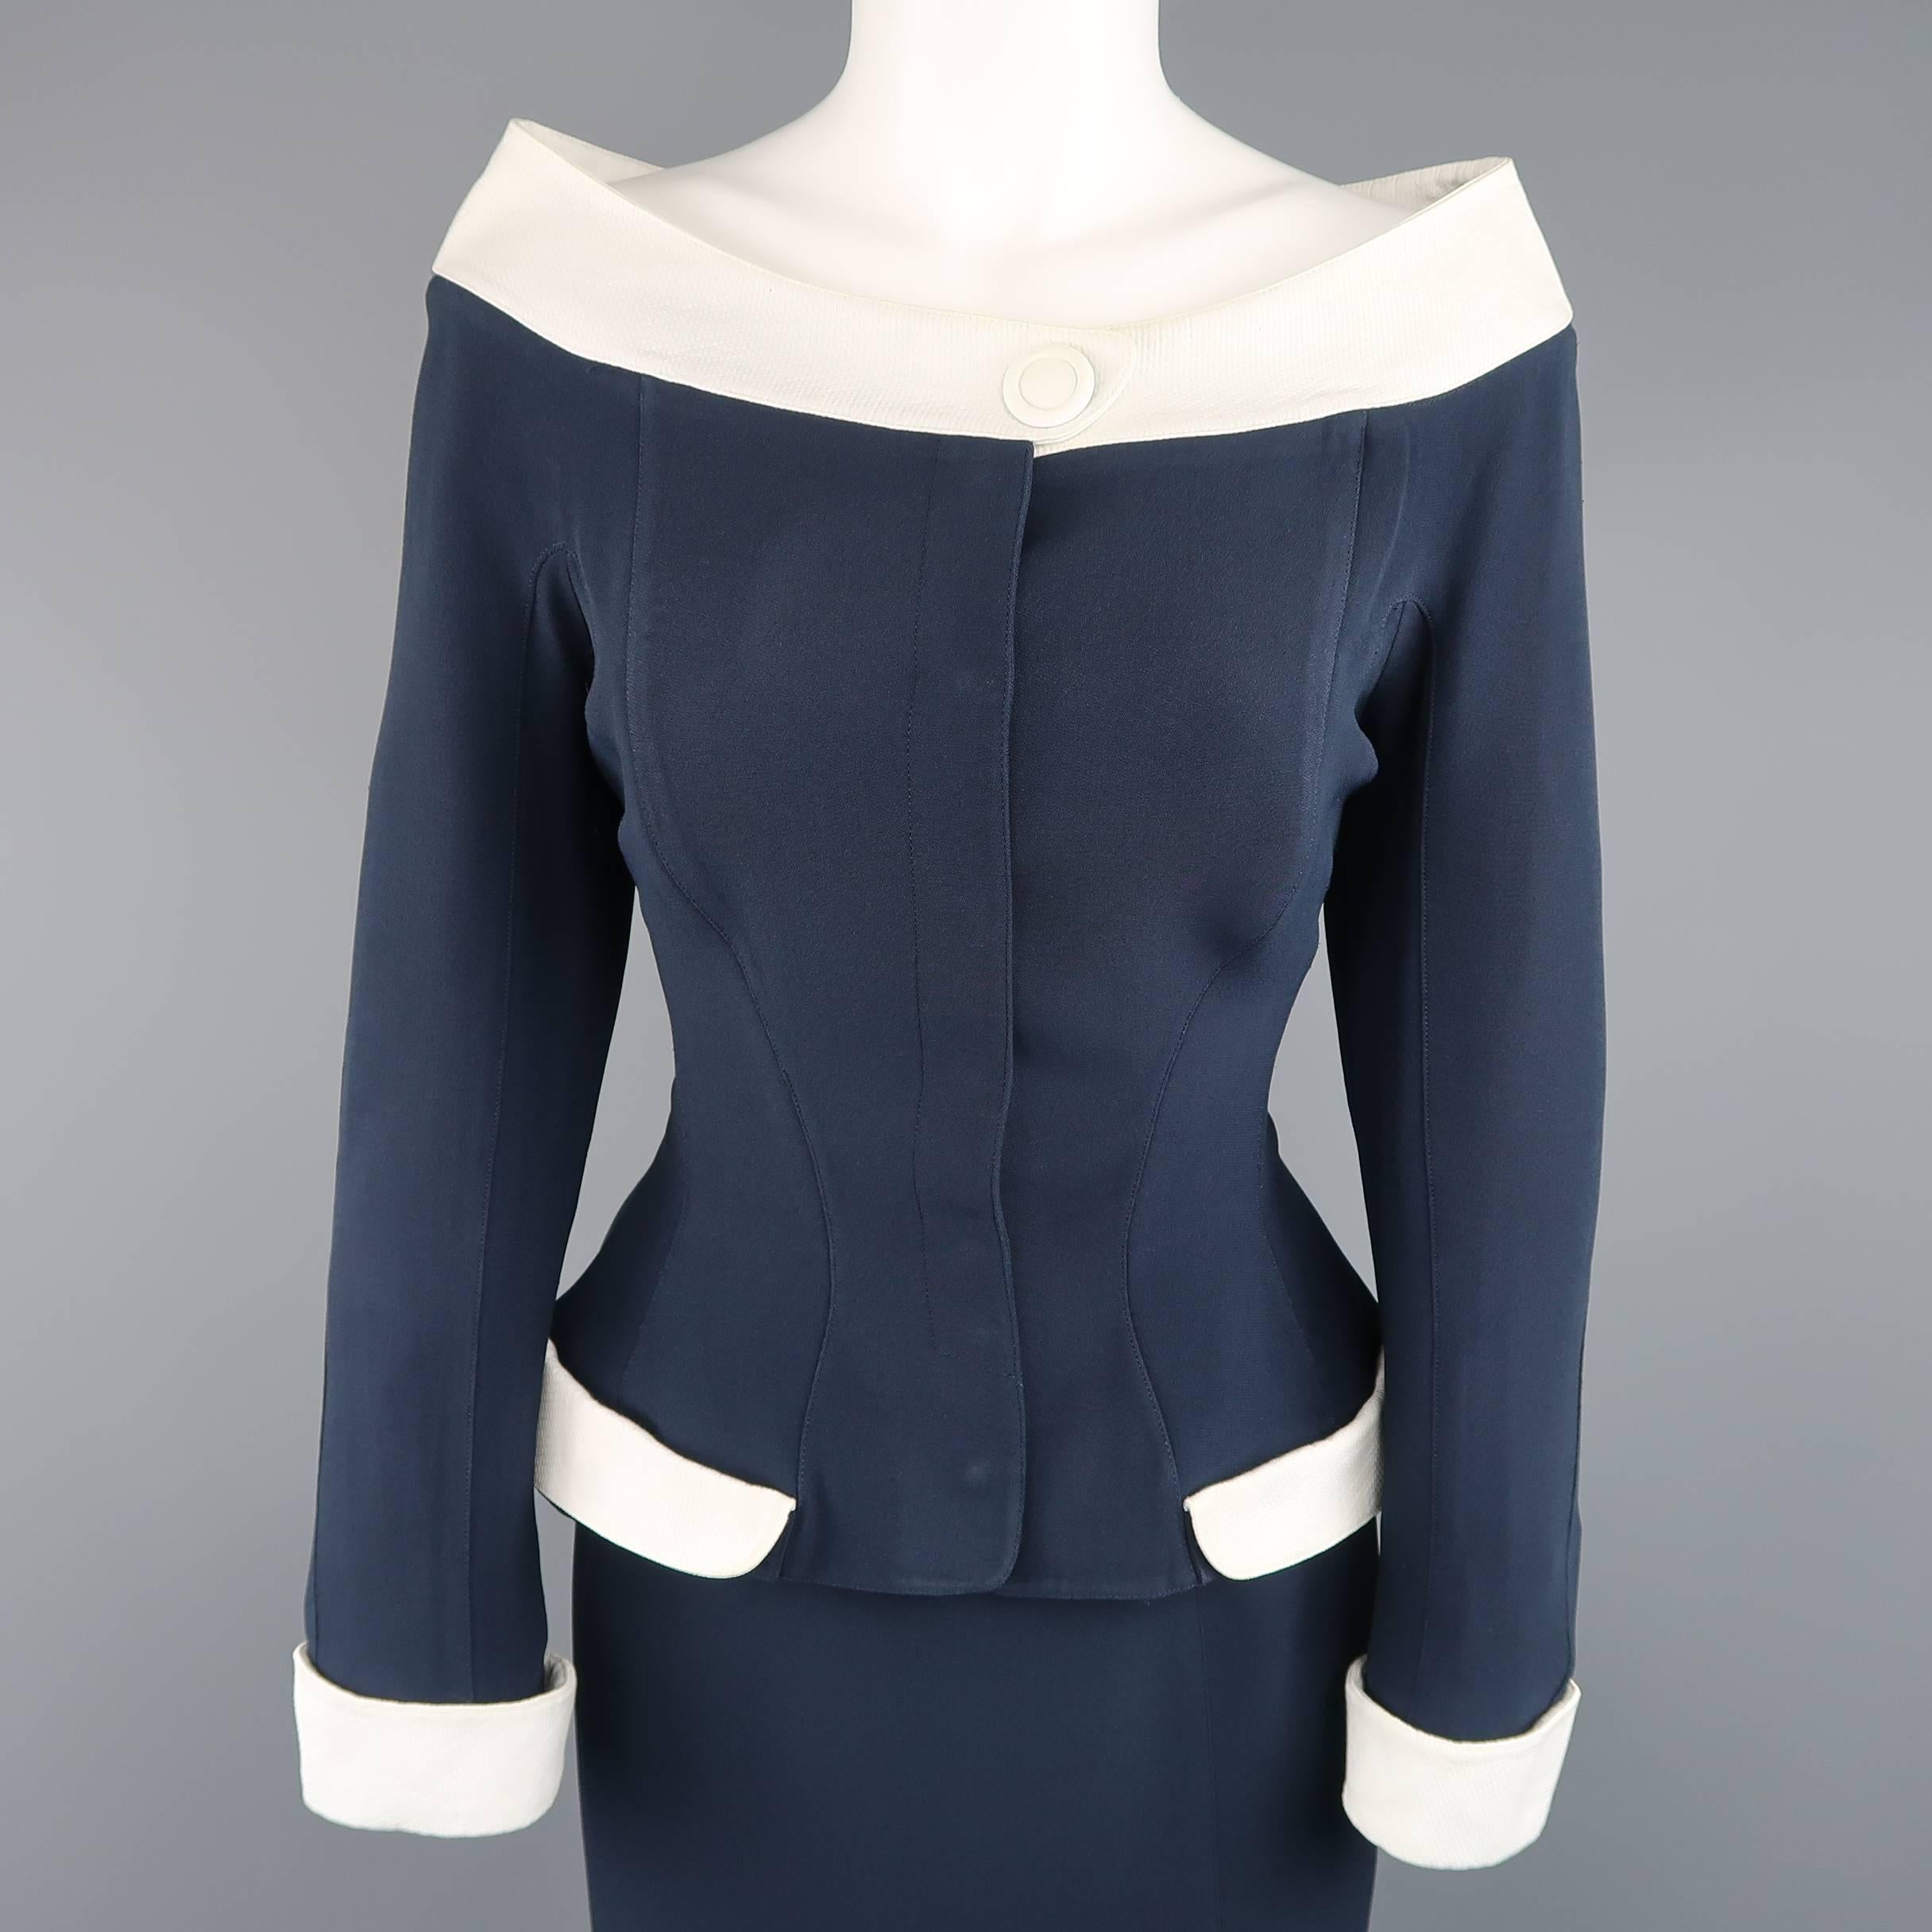 This fabulous early 1990's THIERRY MUGLER suit comes in a structured navy fabric and includes a cropped, cinched waist jacket with off the shoulder portrait collar and white trim and cuffs with a matching pencil skirt. Wear throughout and